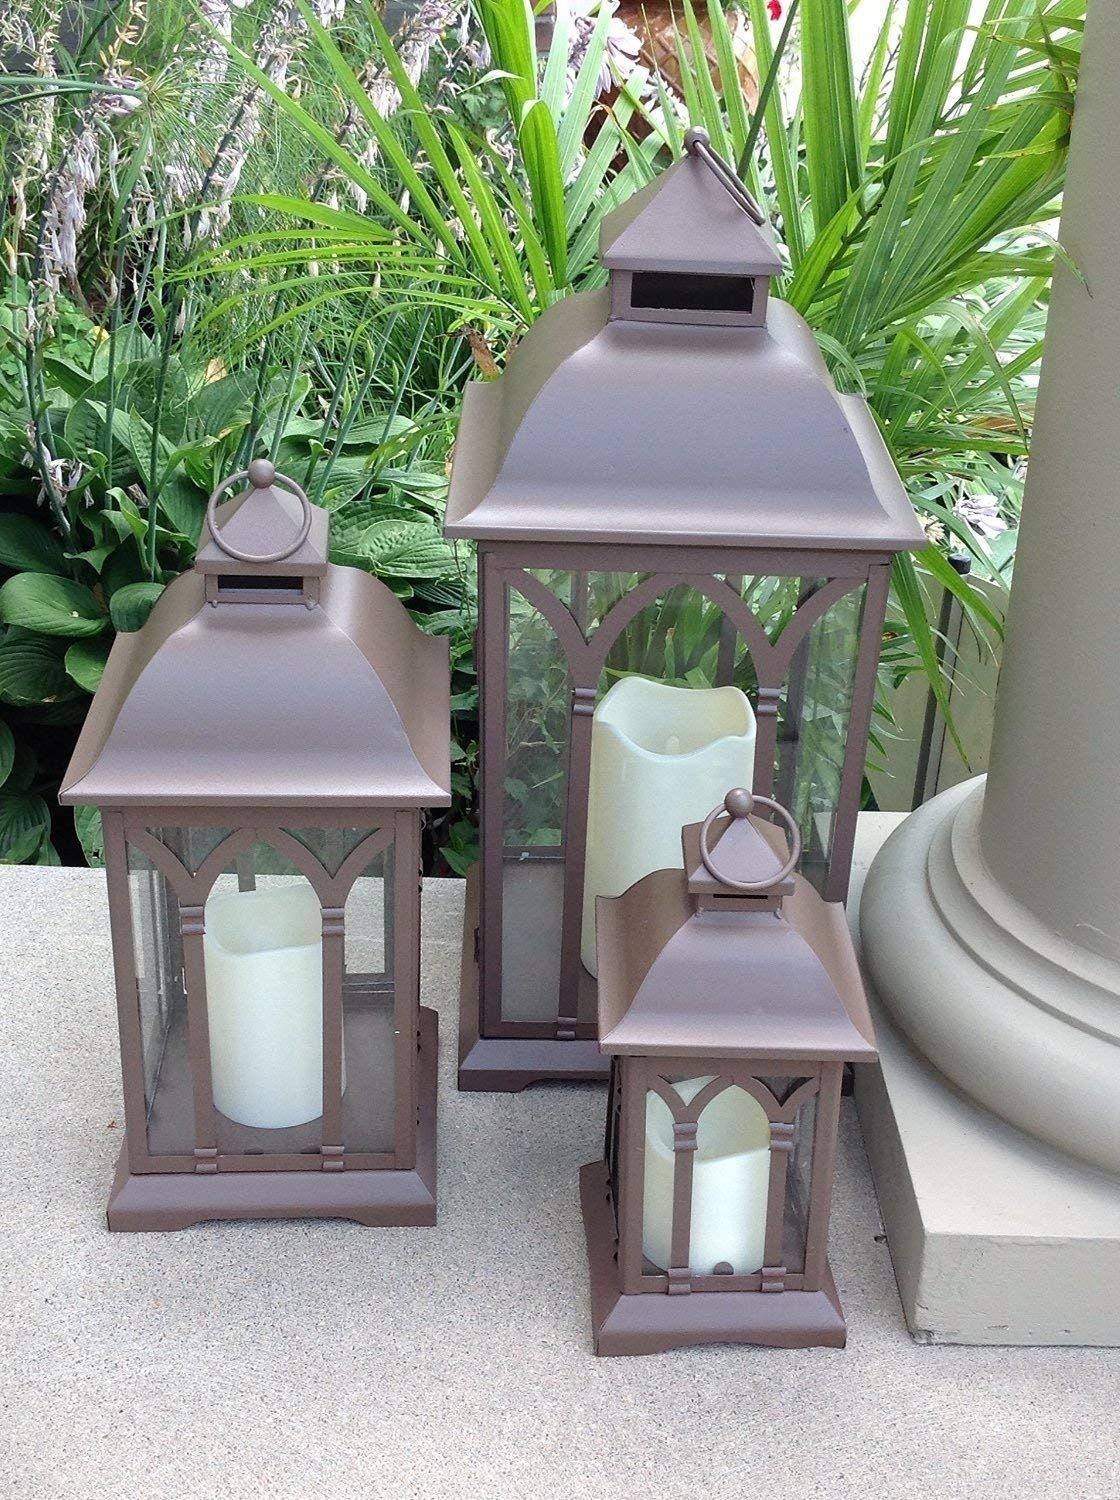 Amazon : Pebble Lane Living 3pc Set Of Outdoor Large Indoor Or With Regard To Large Outdoor Lanterns (View 3 of 20)